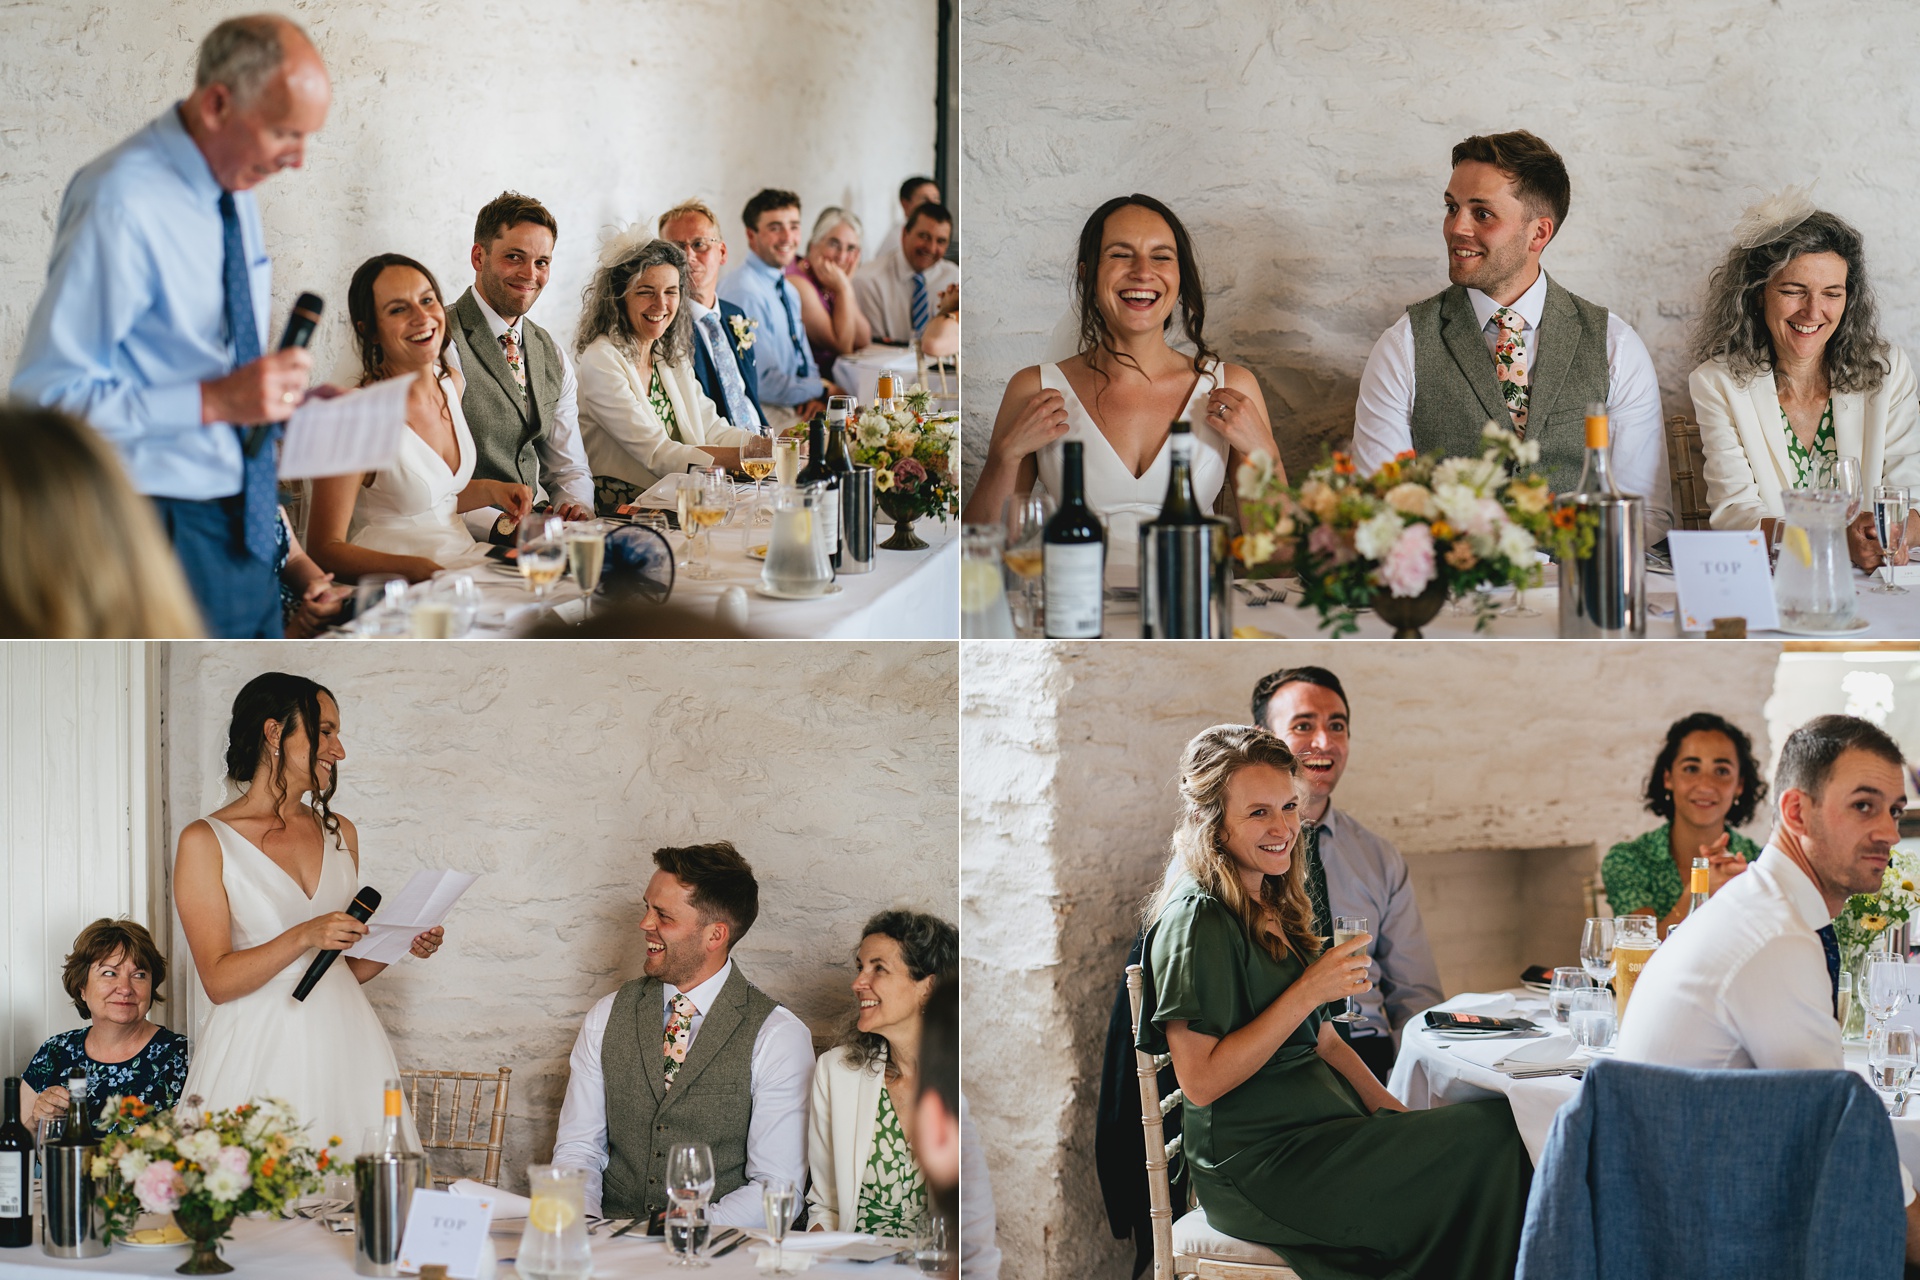 Wedding guests laughing during speeches at a Hestercombe wedding reception